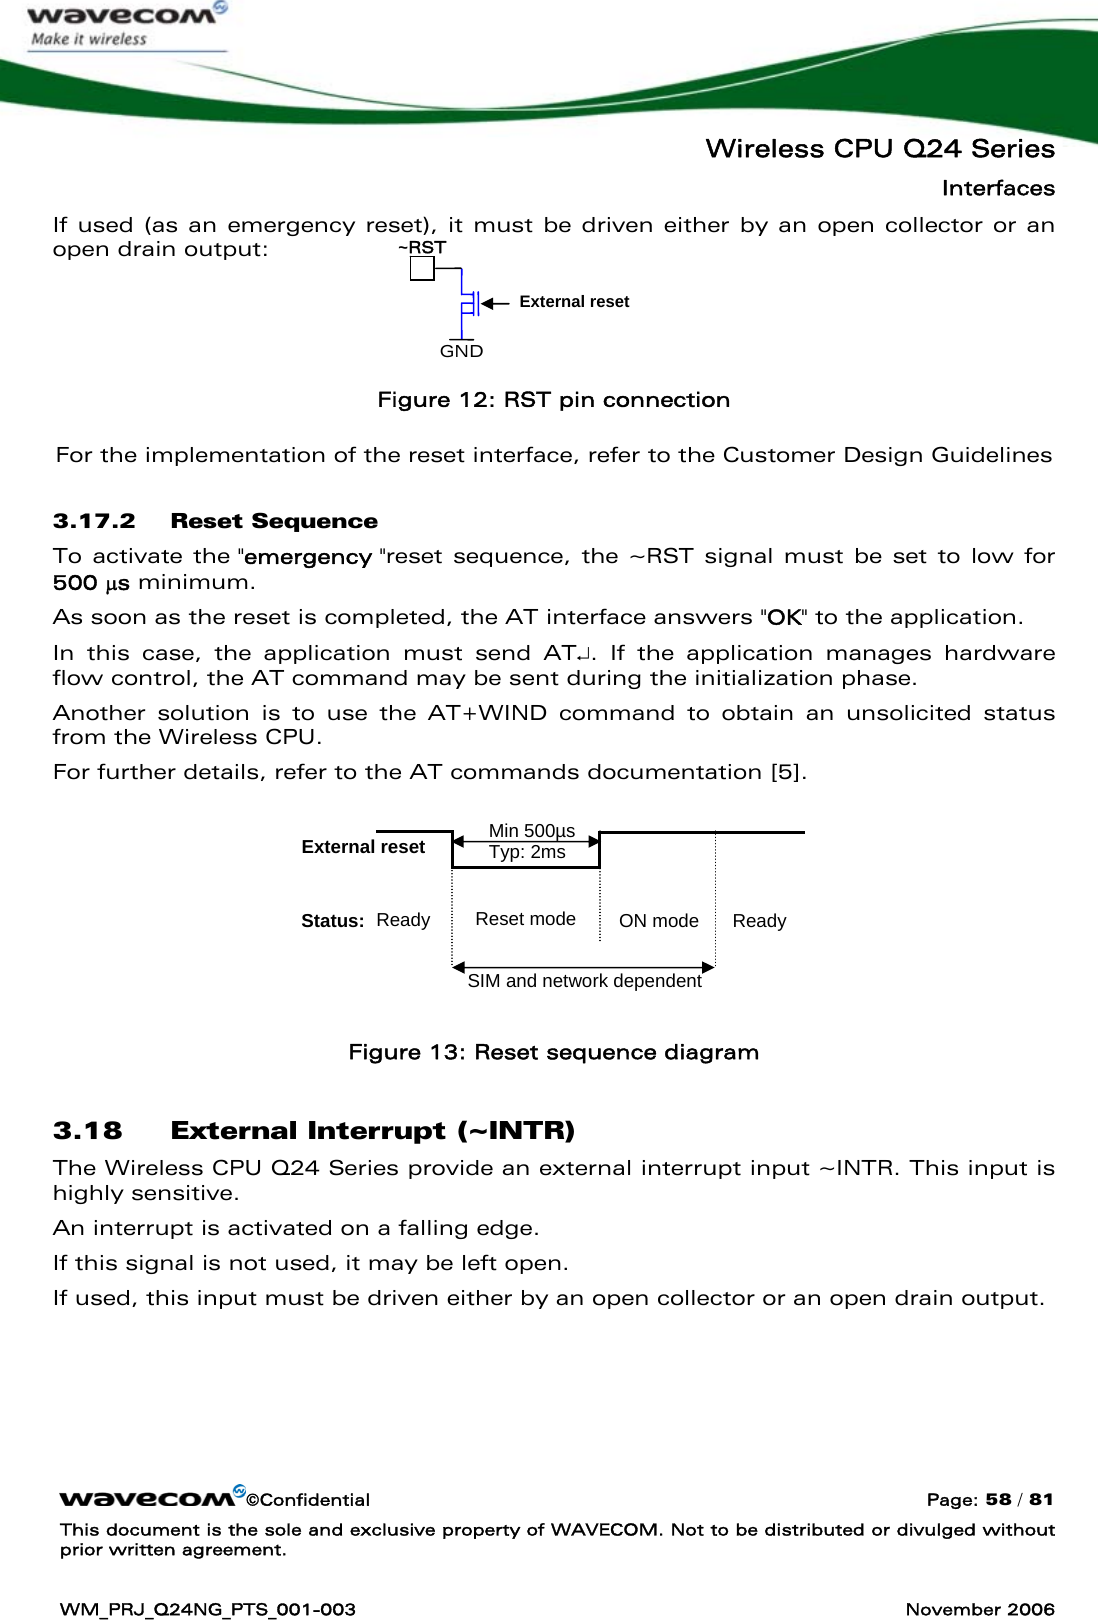   Wireless CPU Q24 Series Interfaces ©Confidential  Page: 58 / 81 This document is the sole and exclusive property of WAVECOM. Not to be distributed or divulged without prior written agreement.  WM_PRJ_Q24NG_PTS_001-003  November 2006  If used (as an emergency reset), it must be driven either by an open collector or an open drain output:    Figure 12: RST pin connection For the implementation of the reset interface, refer to the Customer Design Guidelines 3.17.2 Reset Sequence To activate the &quot;emergency &quot;reset sequence, the ~RST signal must be set to low for 500 μs minimum. As soon as the reset is completed, the AT interface answers &quot;OK&quot; to the application.  In this case, the application must send AT↵. If the application manages hardware flow control, the AT command may be sent during the initialization phase.  Another solution is to use the AT+WIND command to obtain an unsolicited status from the Wireless CPU. For further details, refer to the AT commands documentation [5].        Figure 13: Reset sequence diagram 3.18 External Interrupt (~INTR) The Wireless CPU Q24 Series provide an external interrupt input ~INTR. This input is highly sensitive. An interrupt is activated on a falling edge.  If this signal is not used, it may be left open.  If used, this input must be driven either by an open collector or an open drain output. GND ~RST External reset External reset Status:  Ready  ON mode Min 500µsTyp: 2ms Ready Reset mode SIM and network dependent 